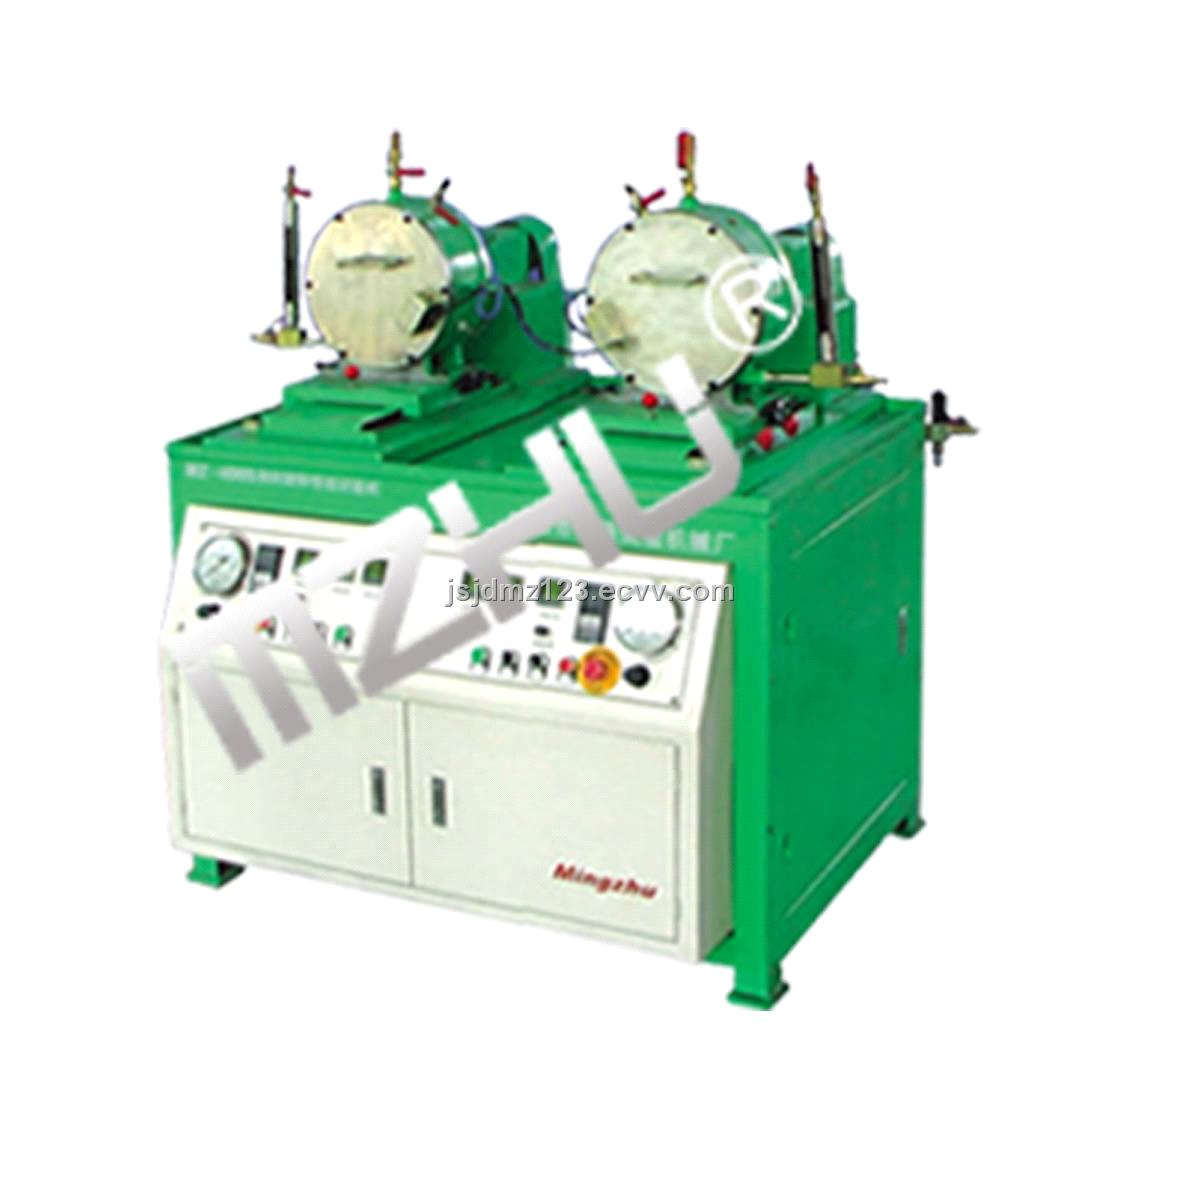 Oil Seal Rotary Performance Tester (MZ-4005)